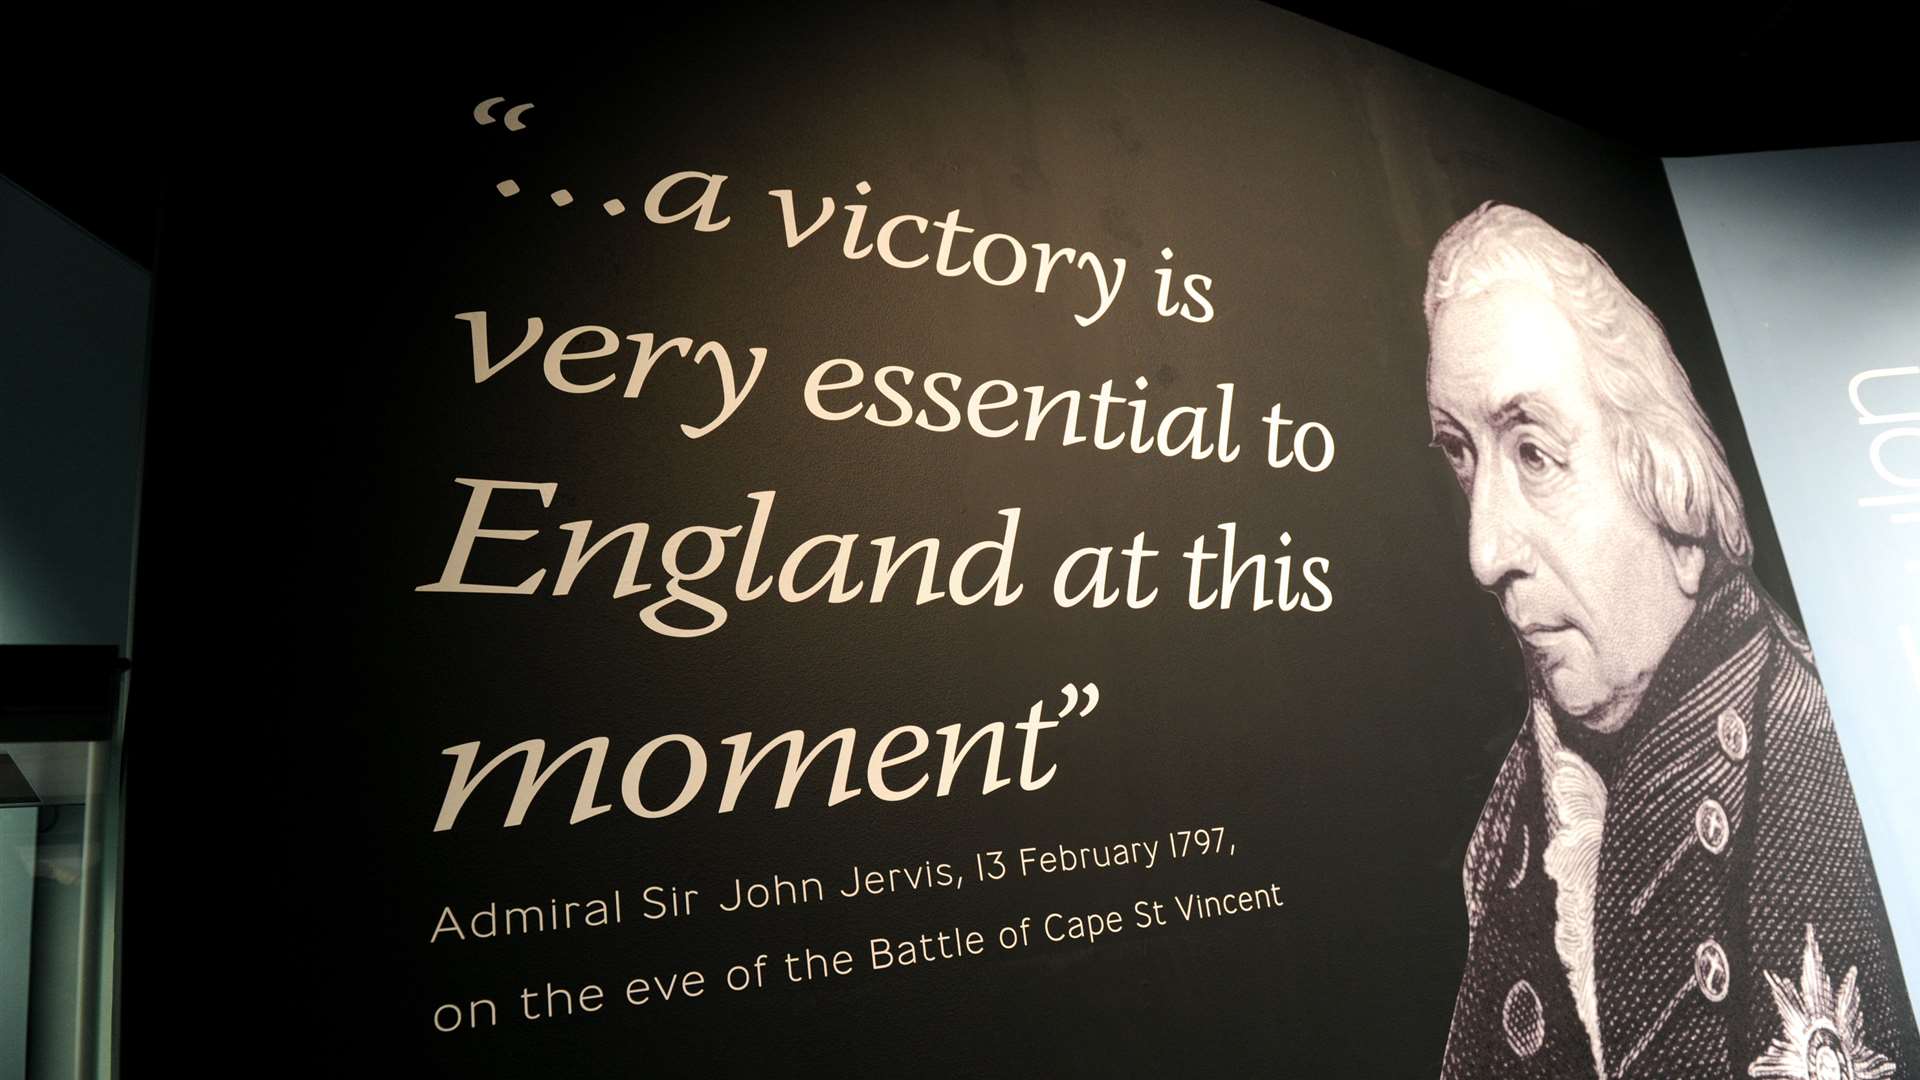 HMS Victory The Untold Story exhibition